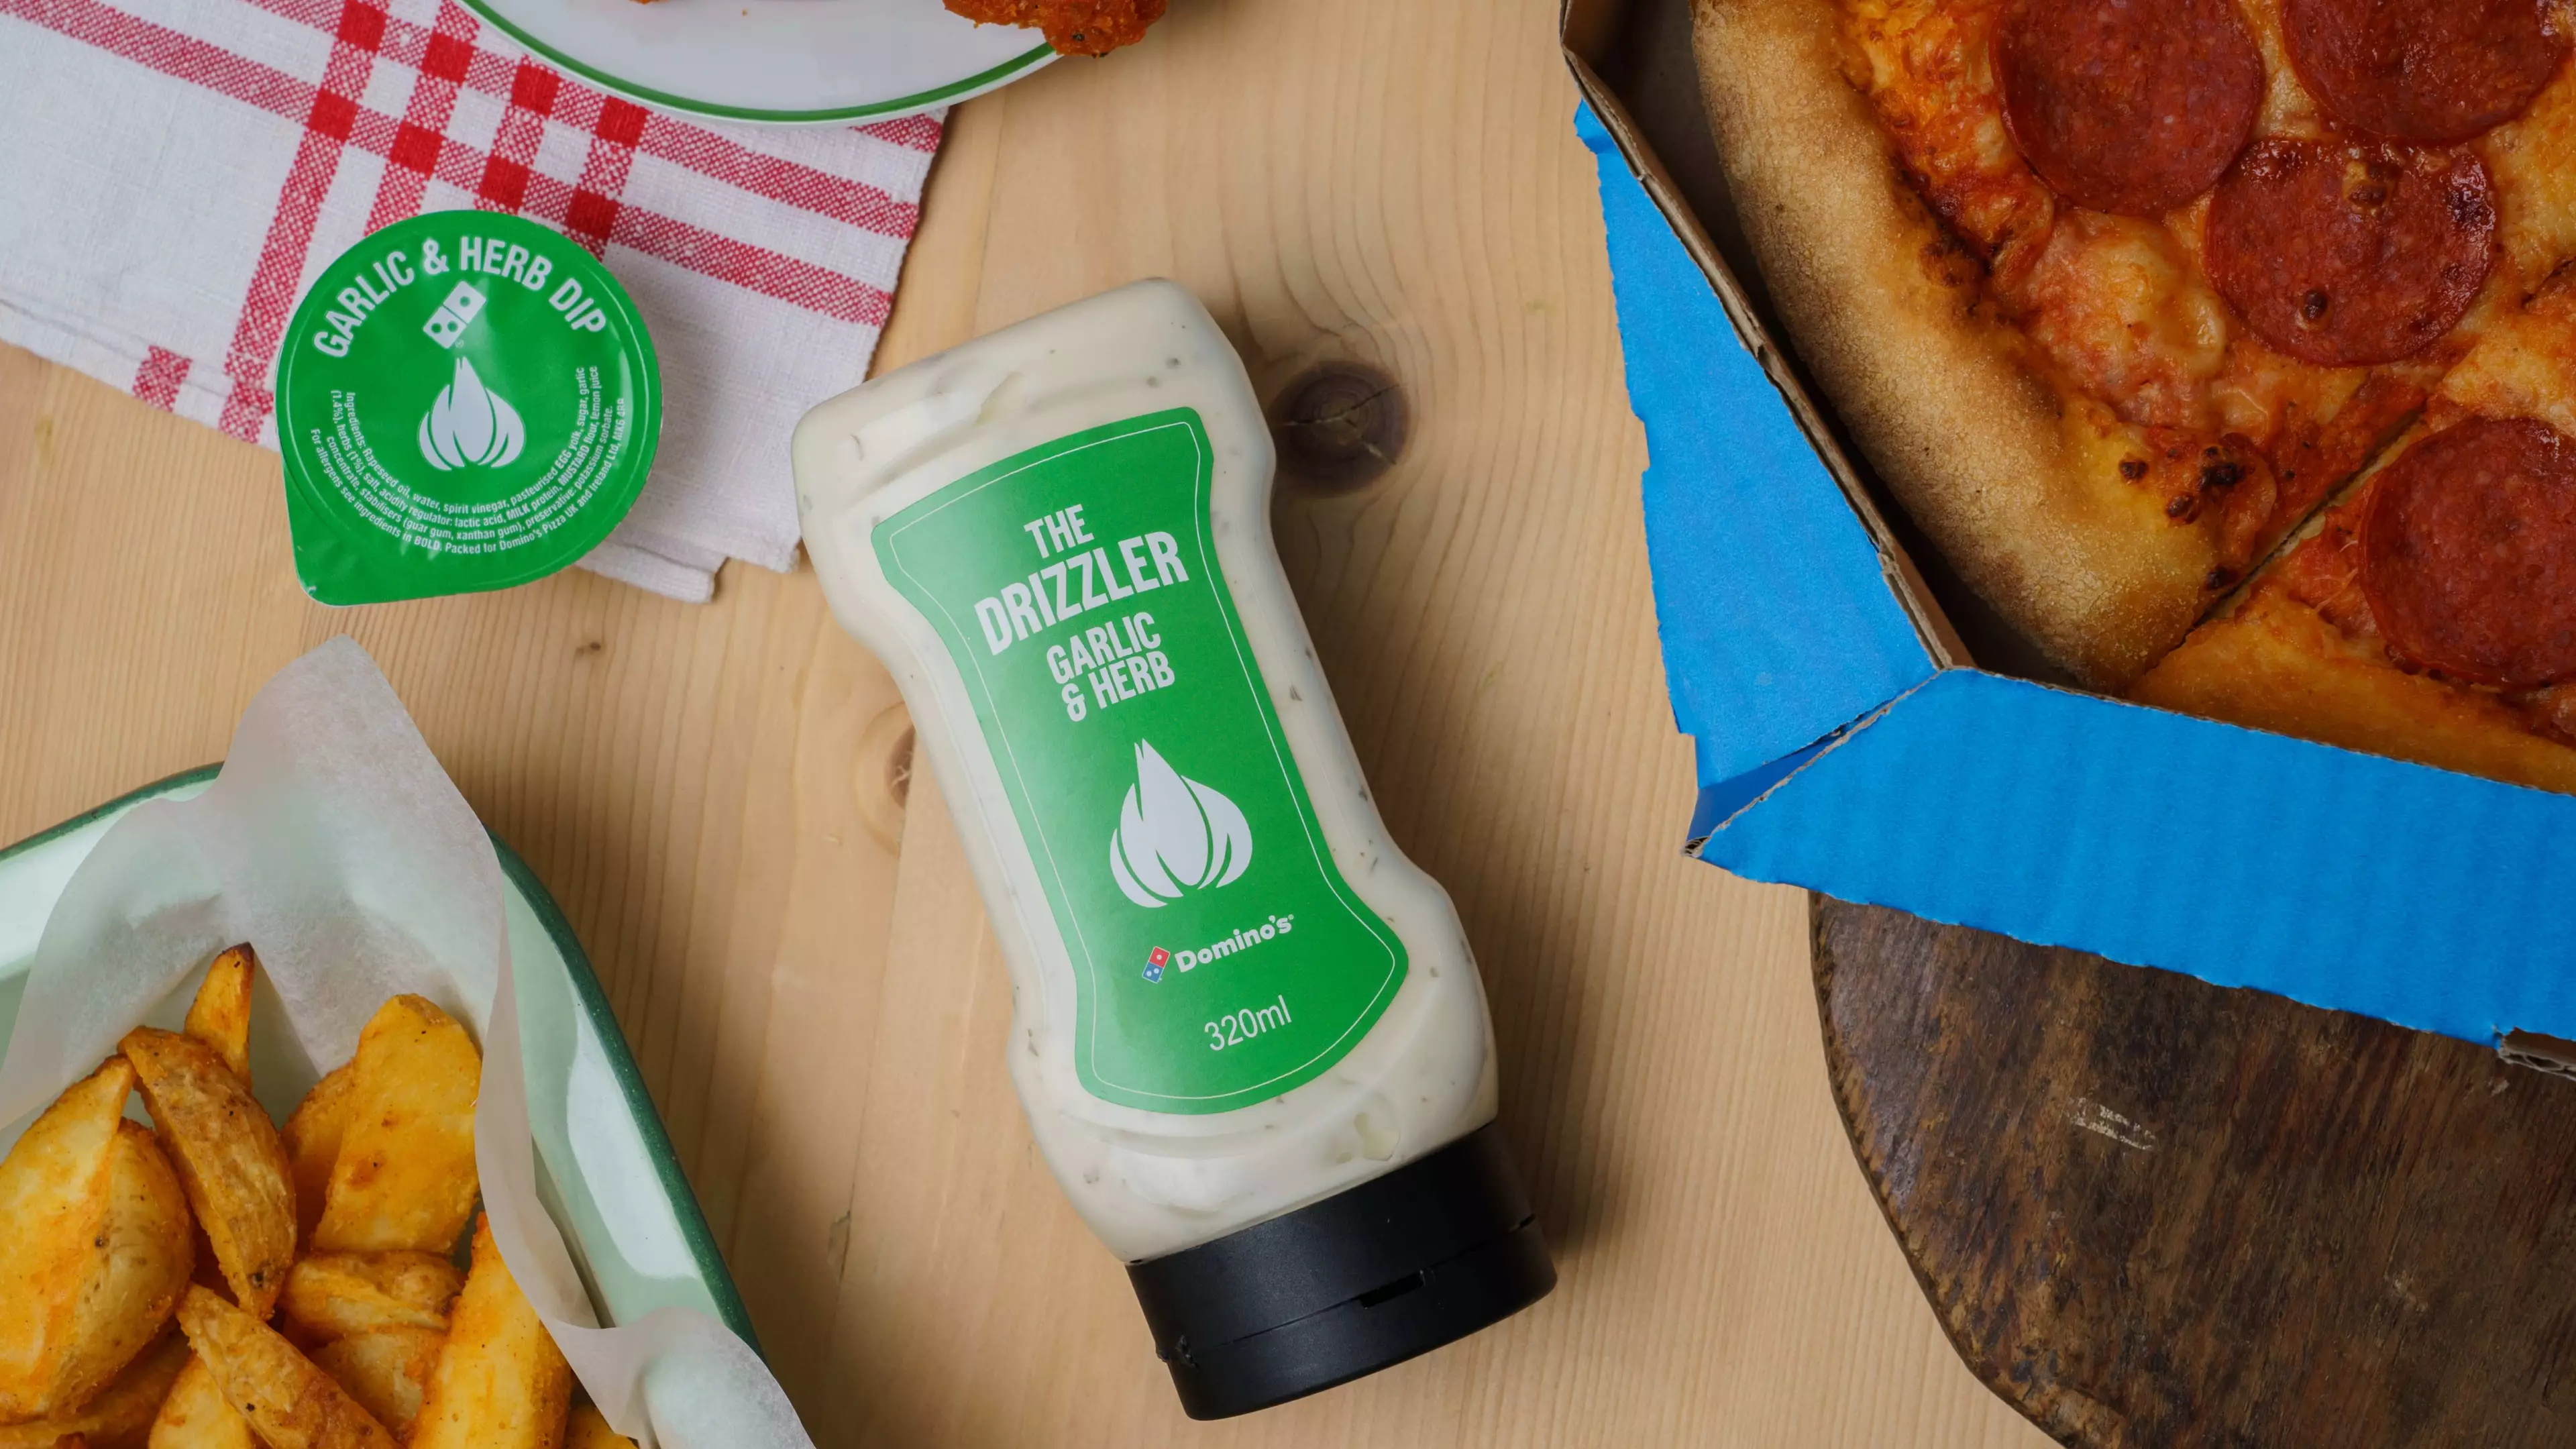 Domino's Has Launched Garlic & Herb Sauce Bottles For The First Time